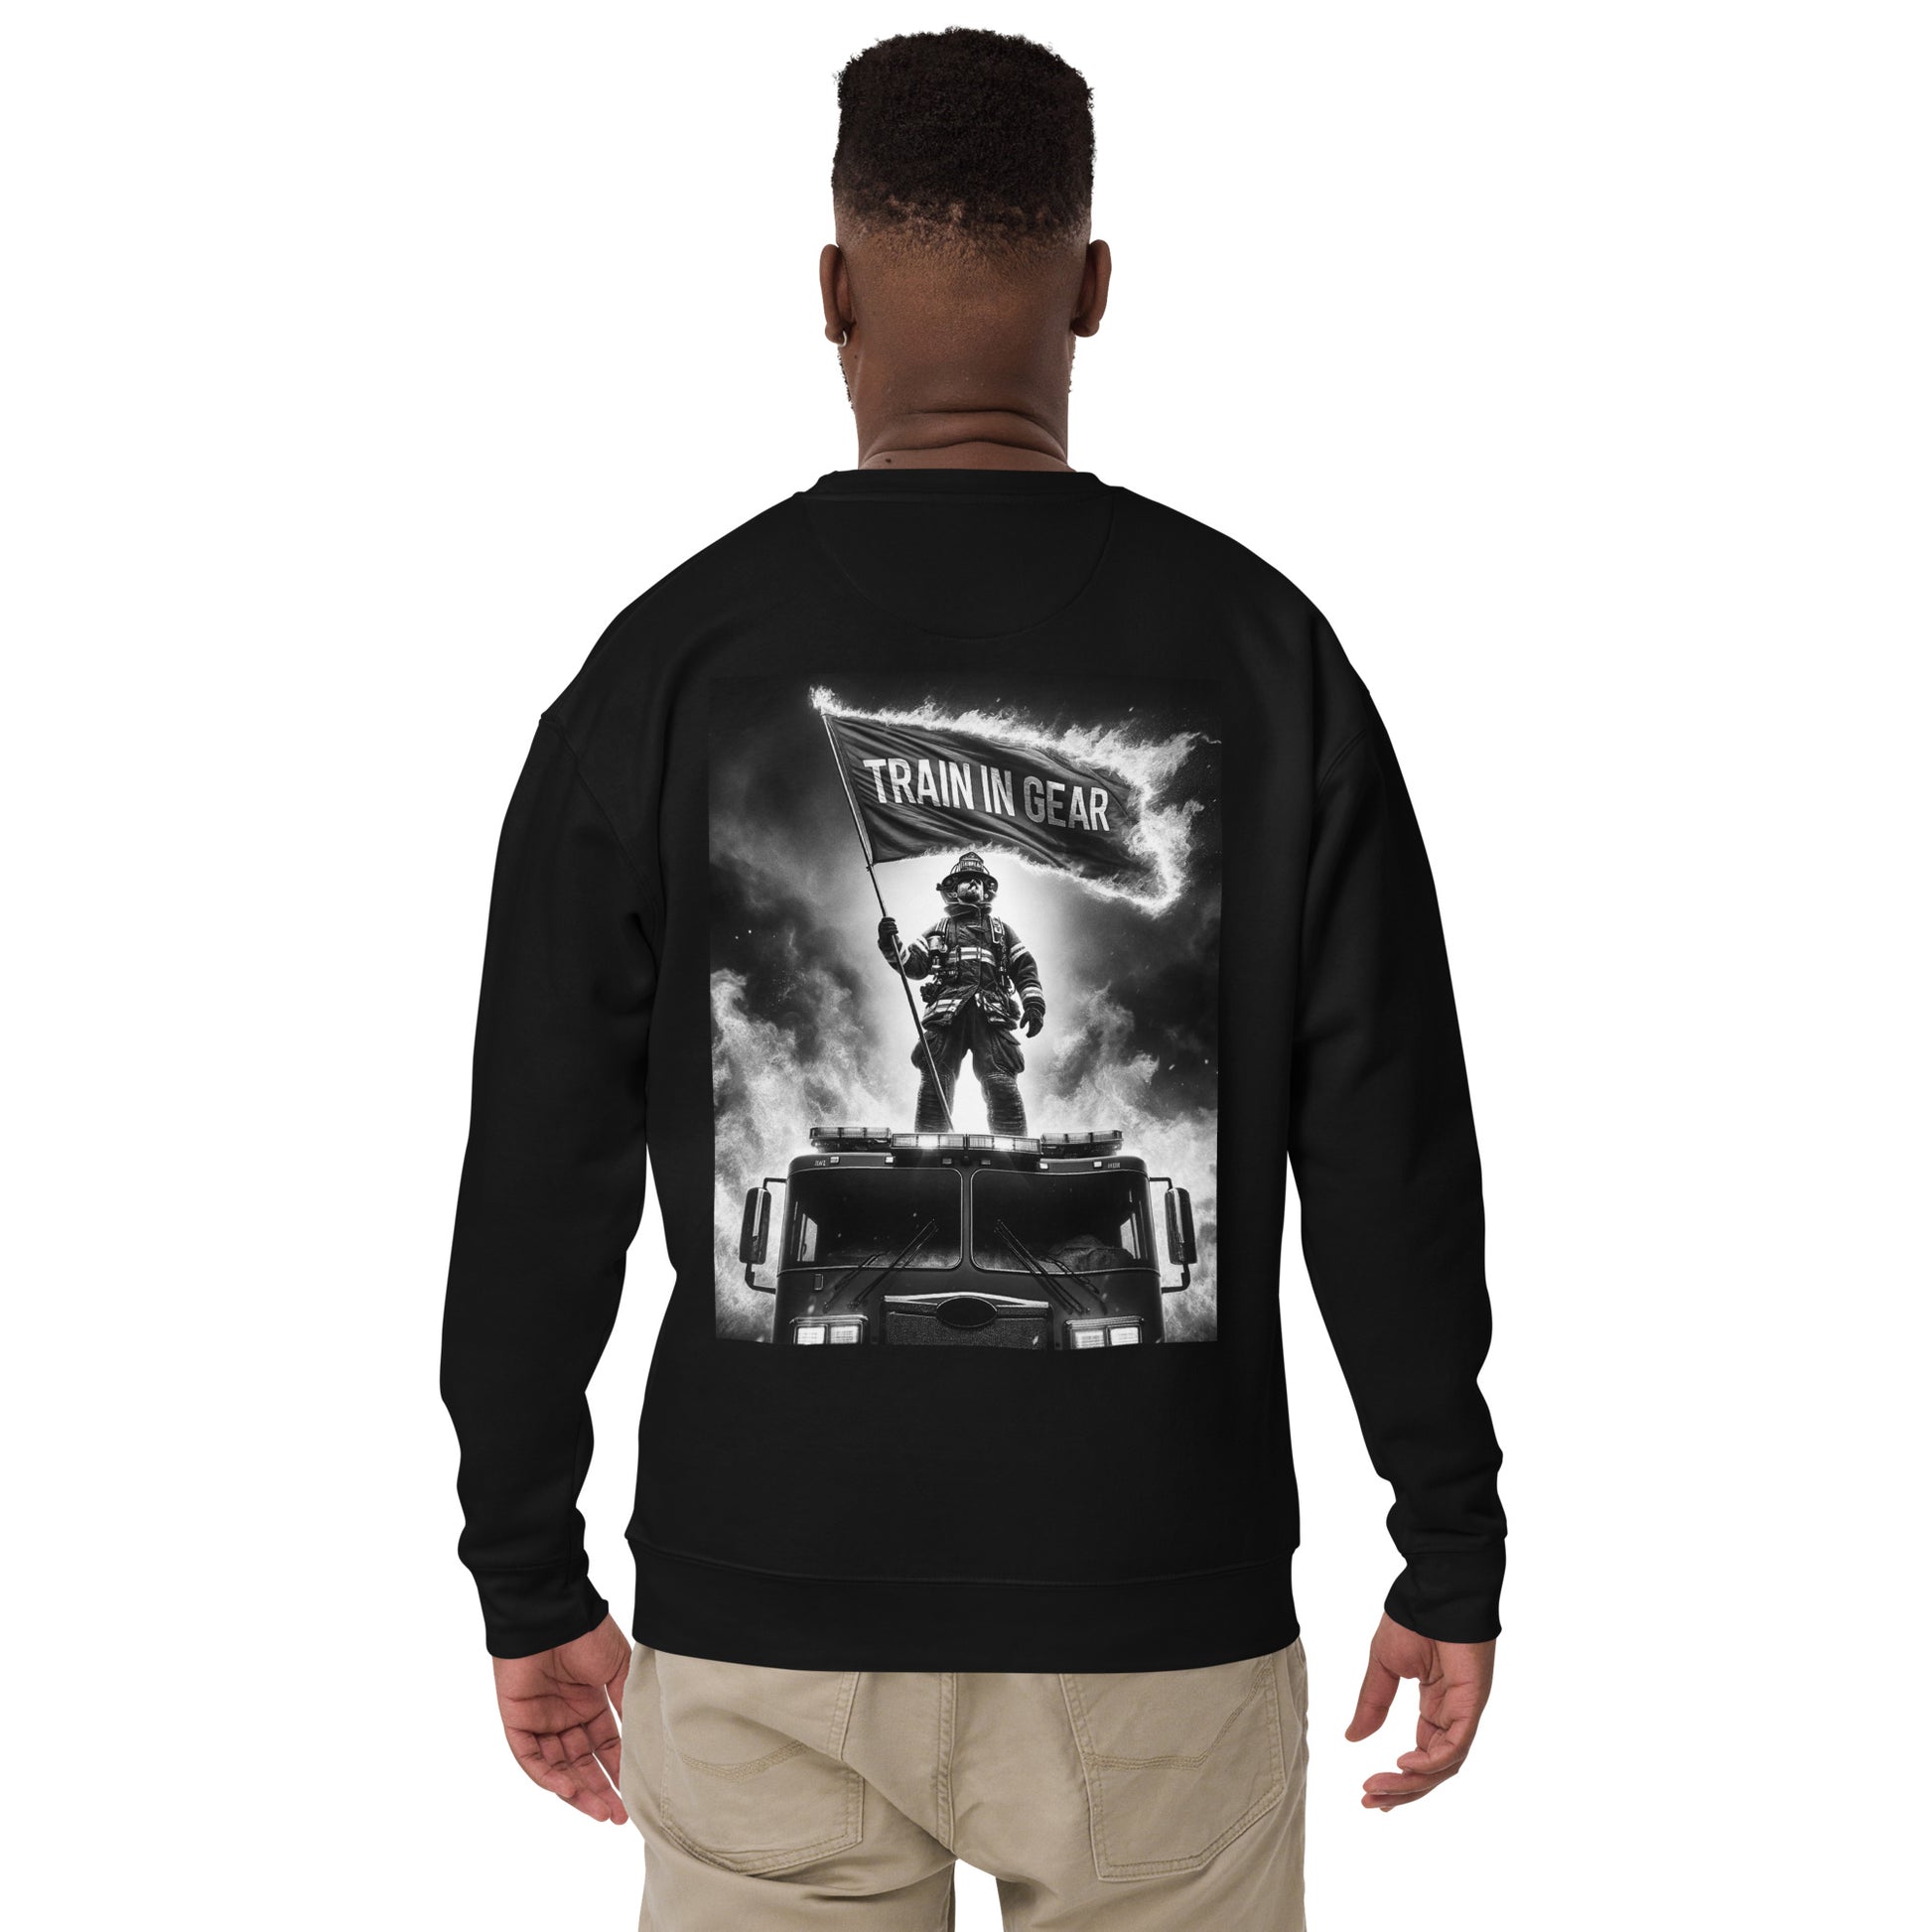 Train in Gear Firefighter graphic sweatshirt long sleeve in black. Black and white image of a firefighter standing on a fire truck, holding up a burning flag that reads "Train in Gear".